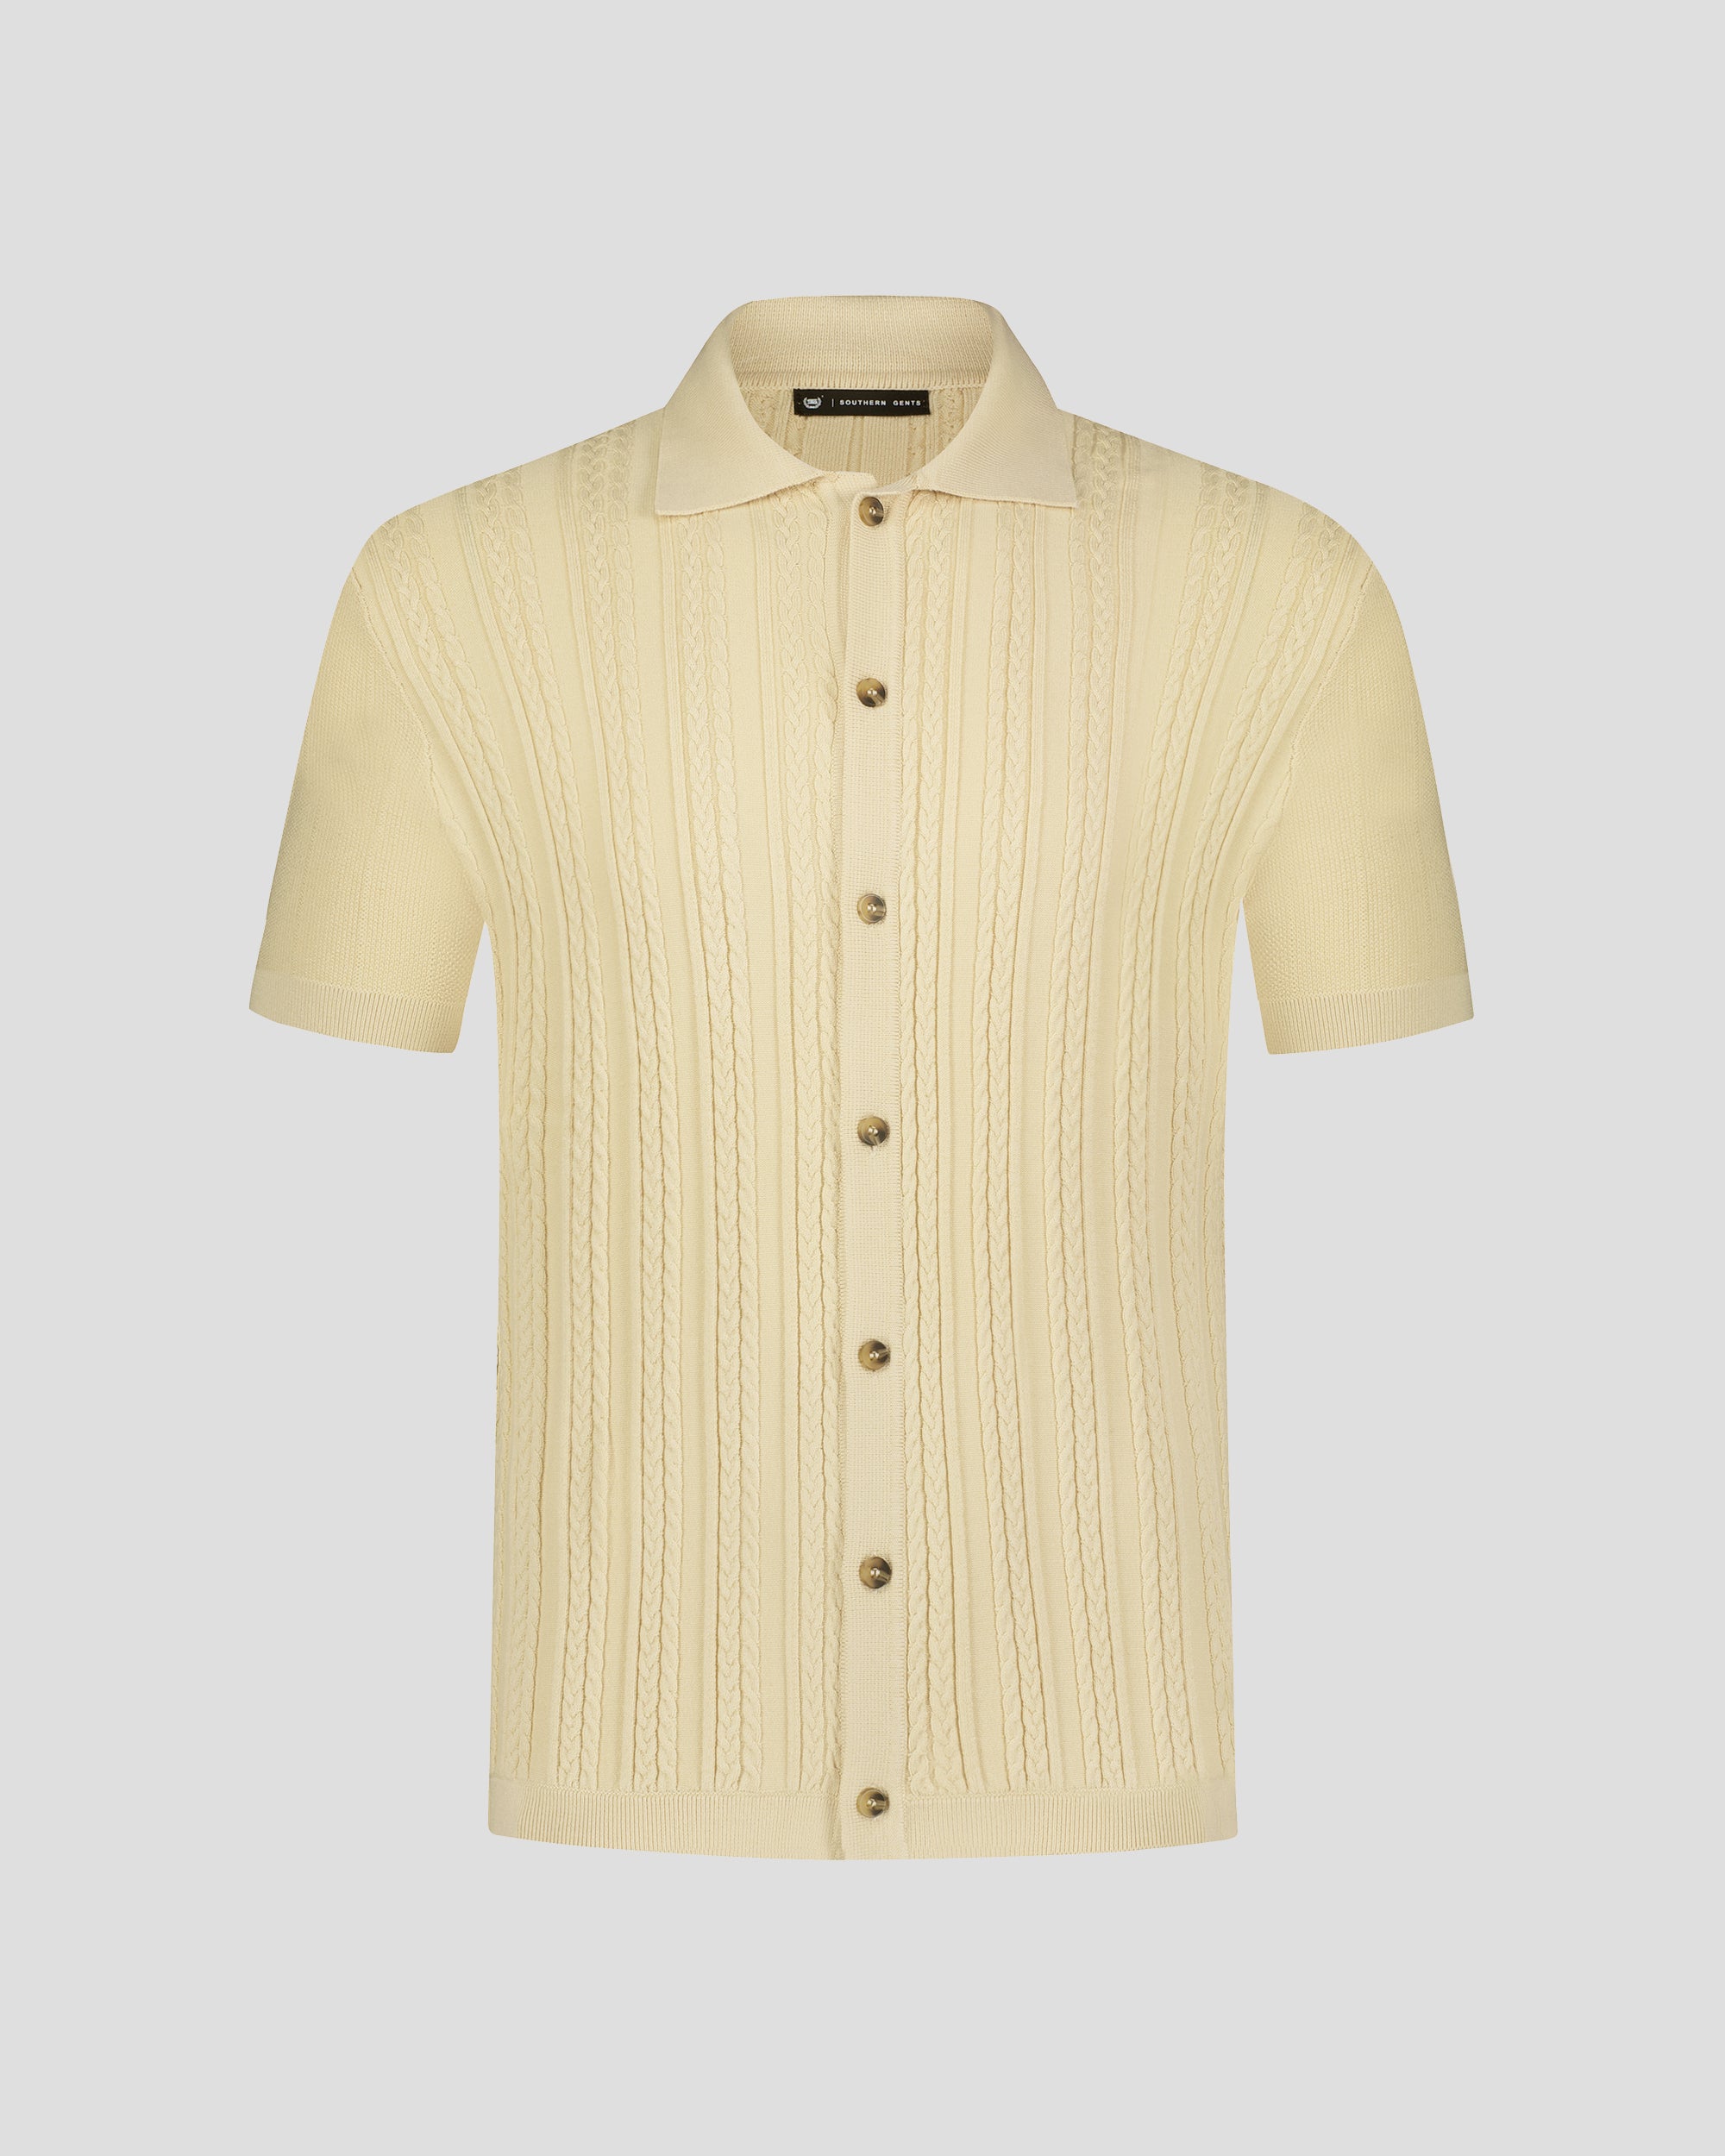 SG Knit Polo - Cable Knit Tan – Southern Gents